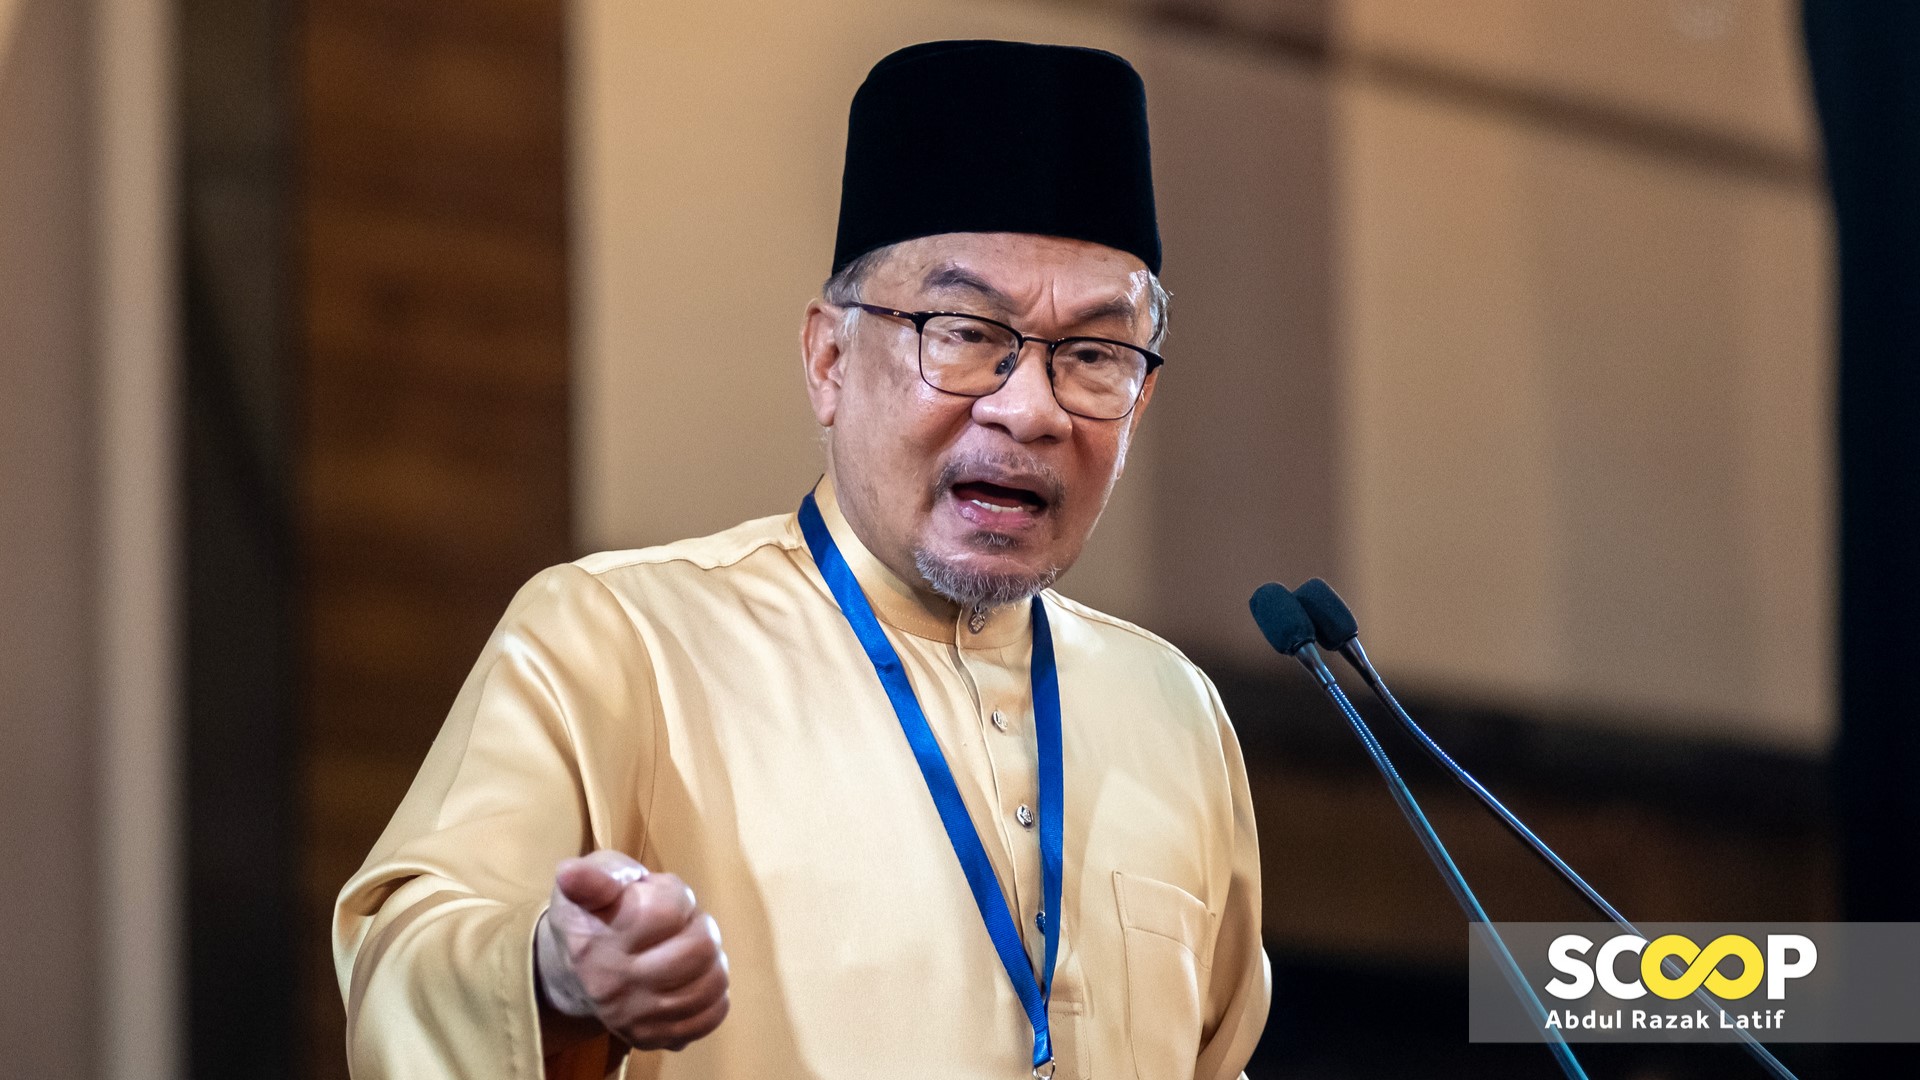 Mediocre scholar should not be brought in as a visiting professor: Anwar